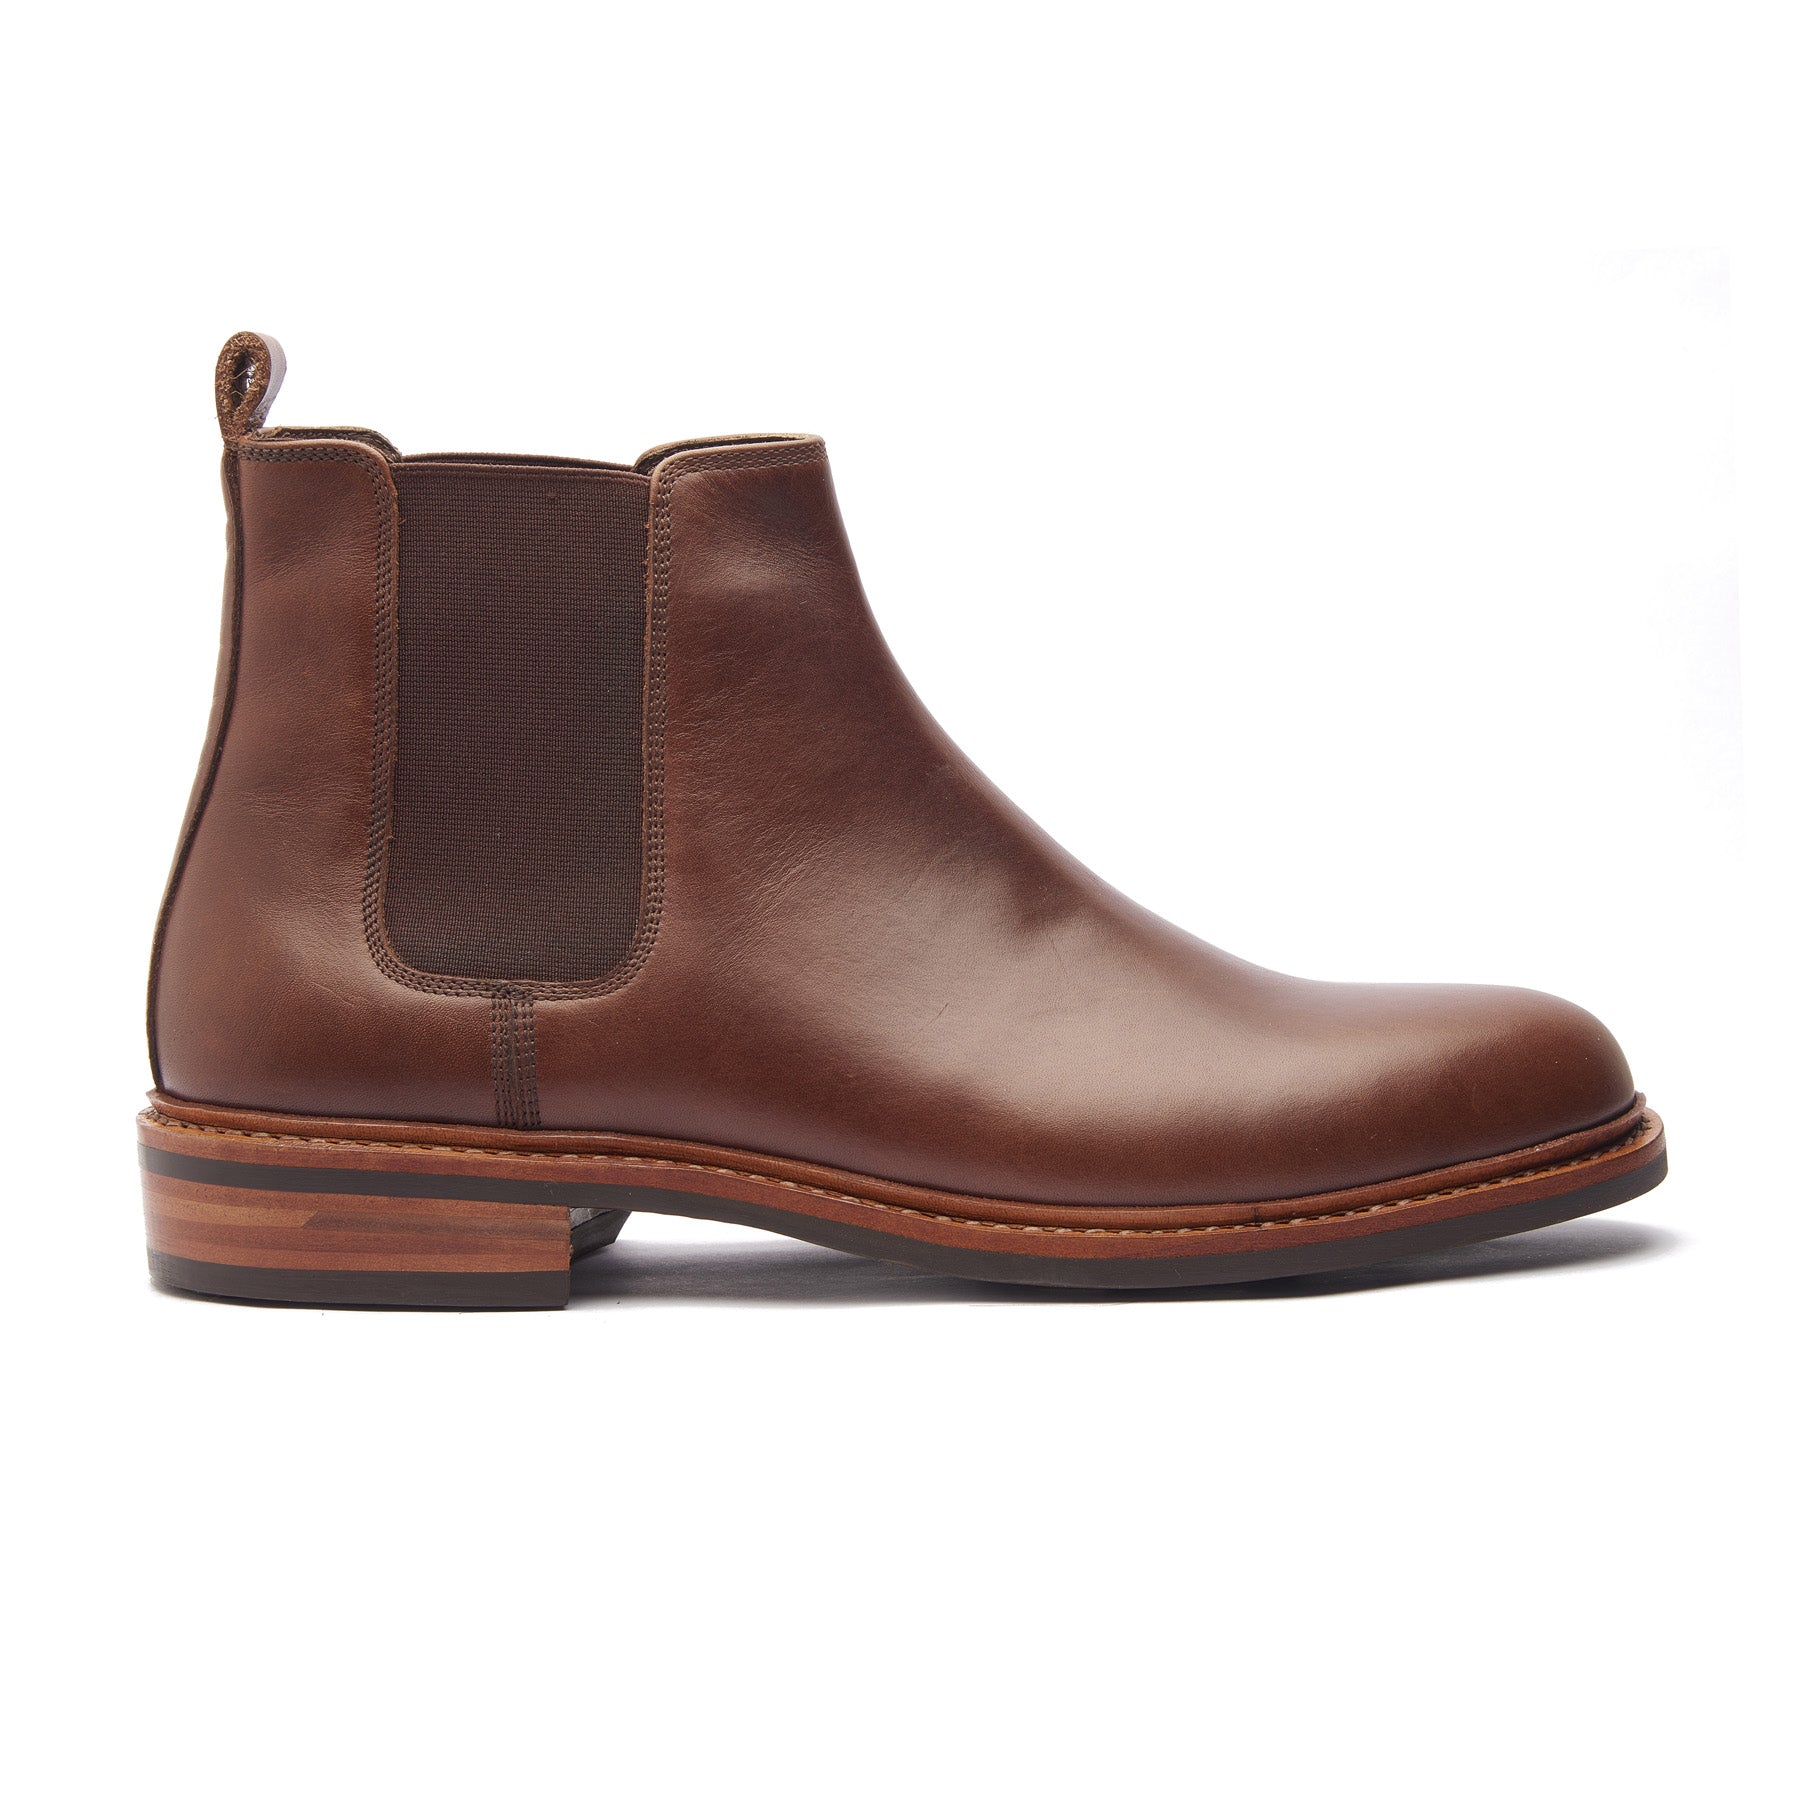 Harley, Chelsea Boot - Hidro Pullup Tan| Hand Welted Boots 2.0 – BLKBRD ...